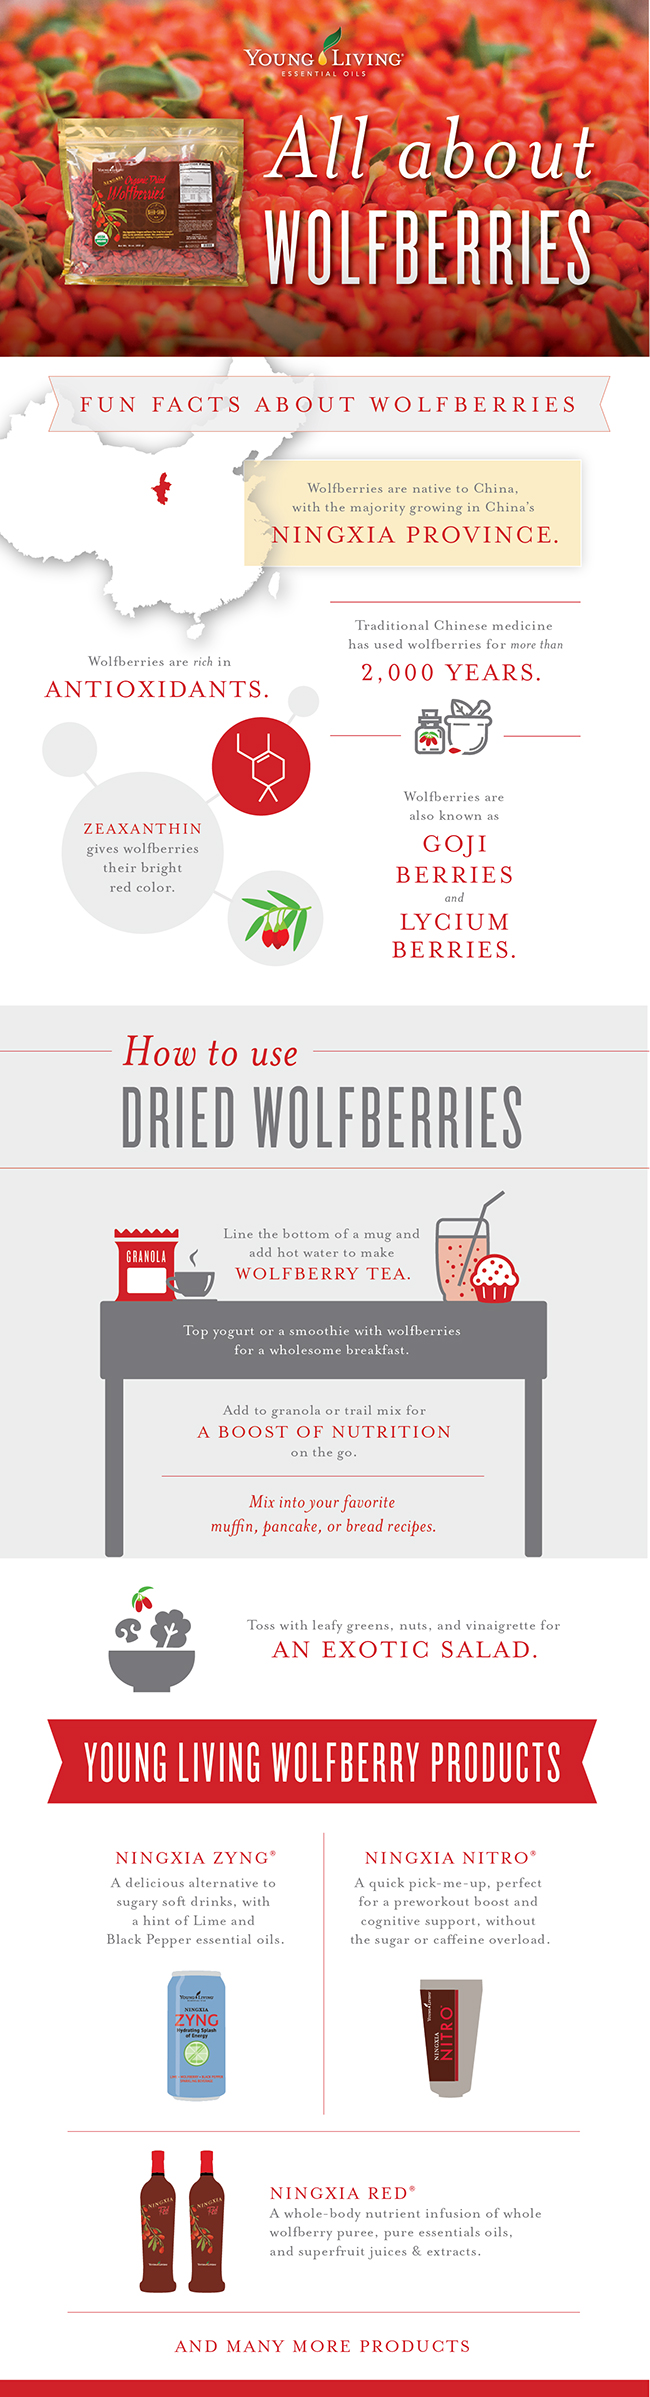 Fun facts about wolfberries infographic